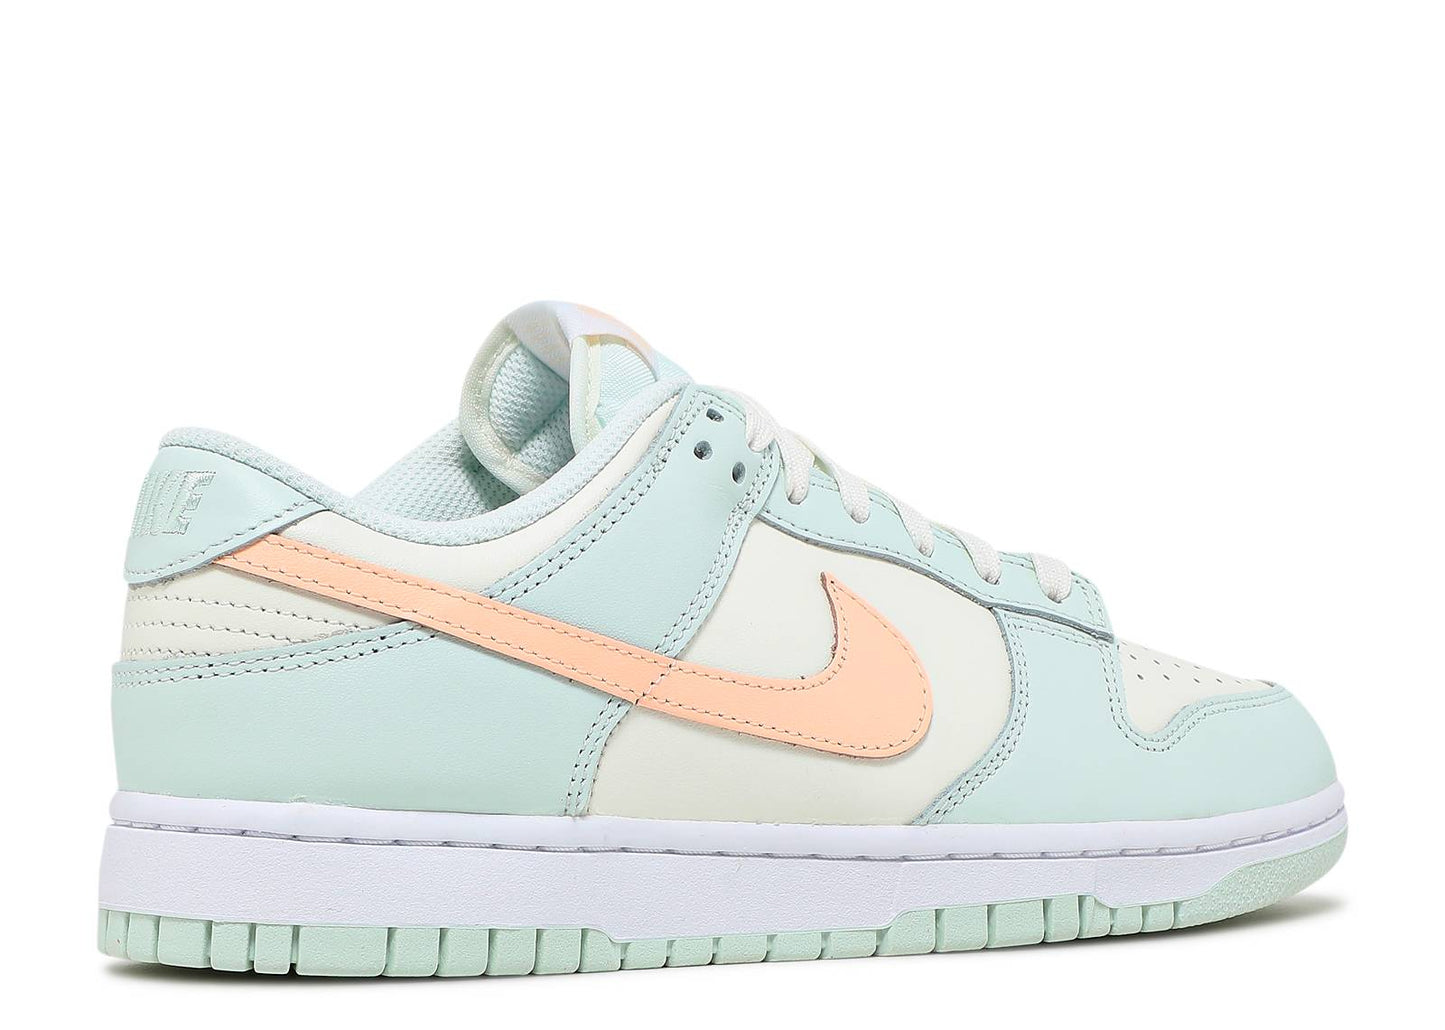 Nike Dunk Low WMNS "Barely Green"